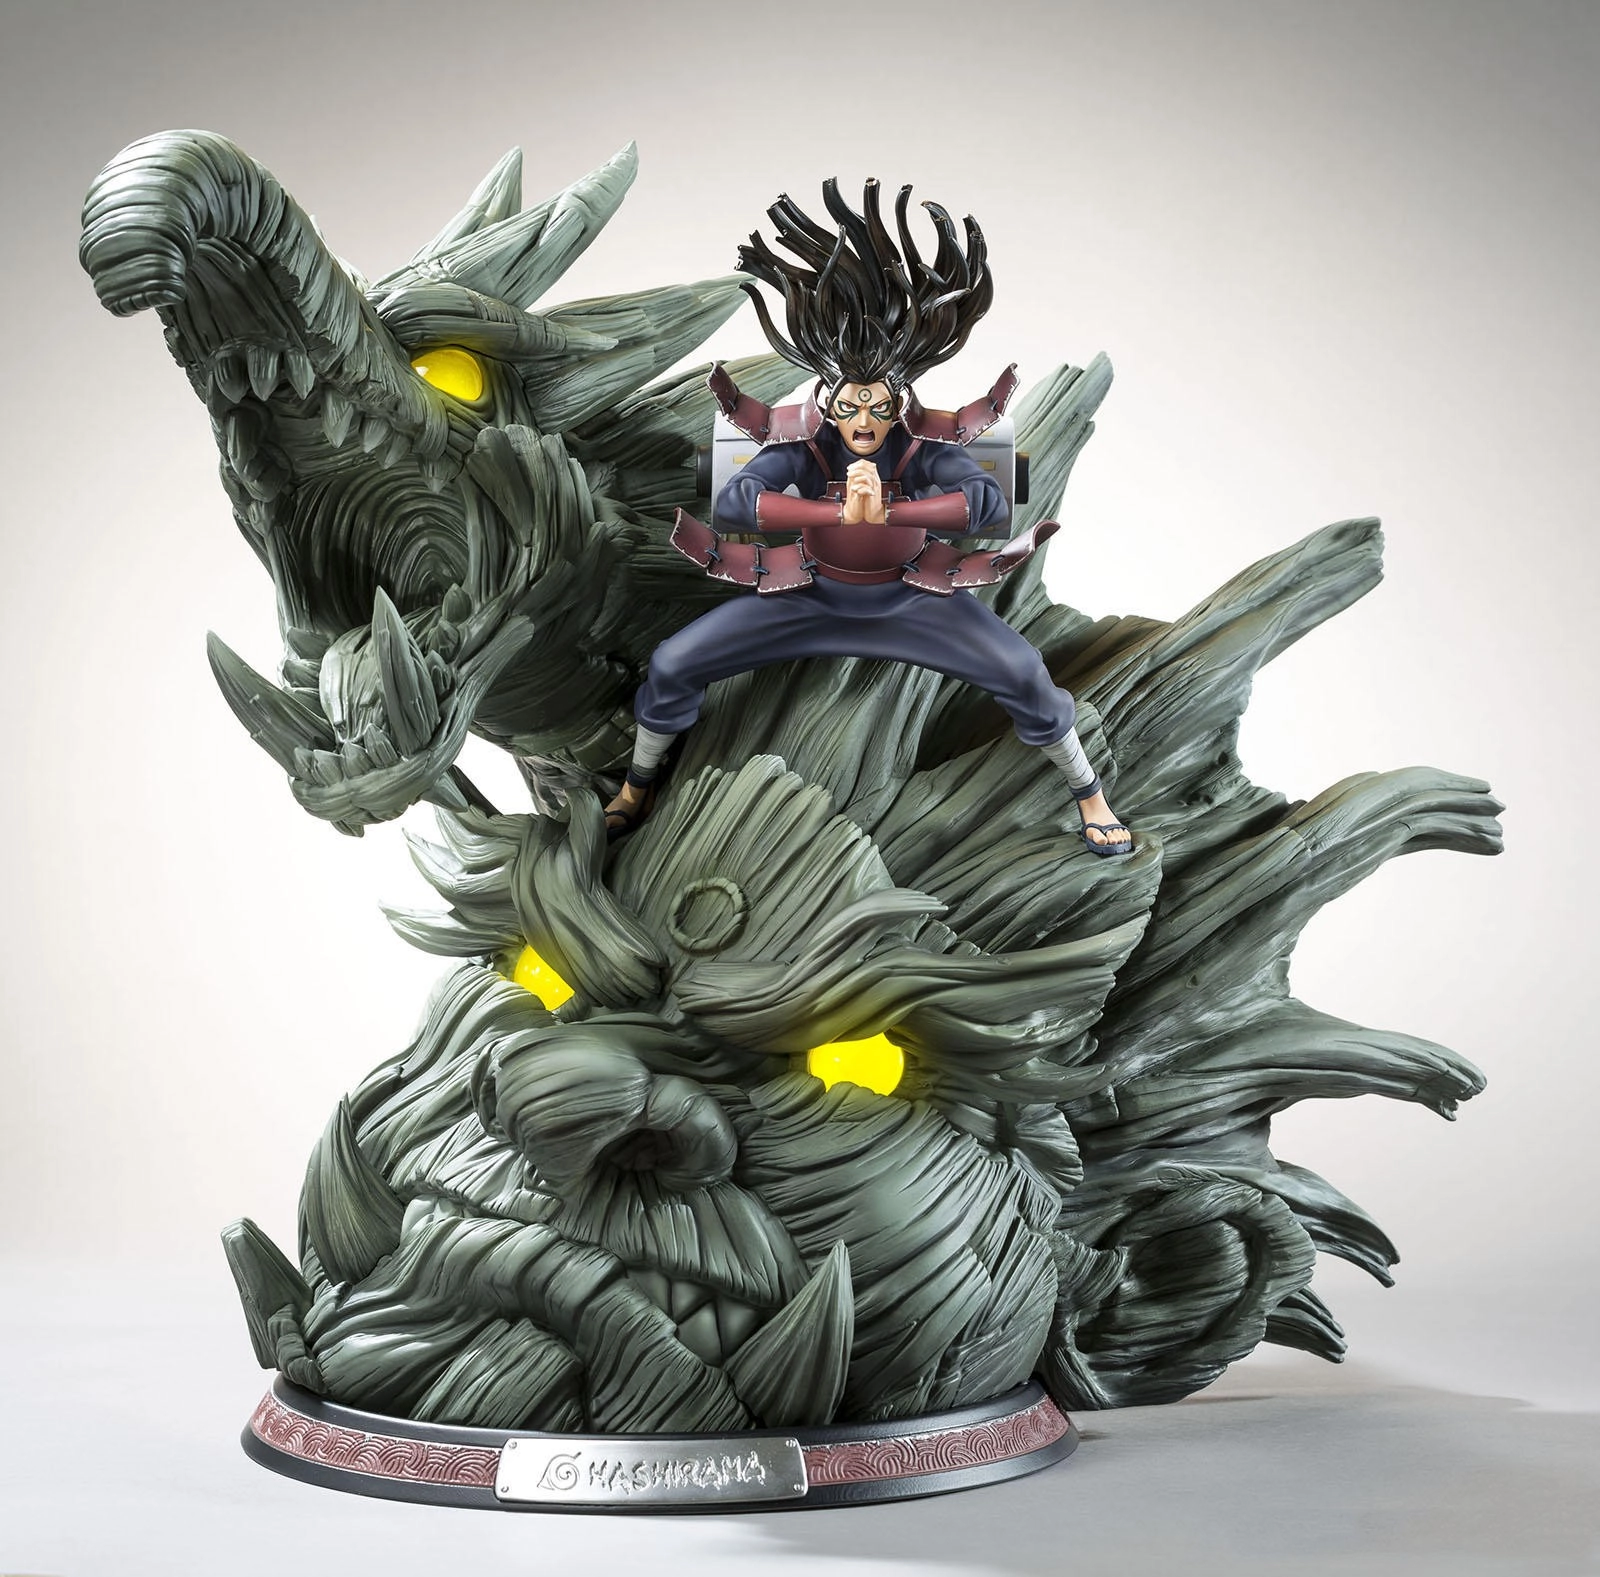 DaWeebStop - Authentic Anime Resin Statues | Exclusive Anime Apparel